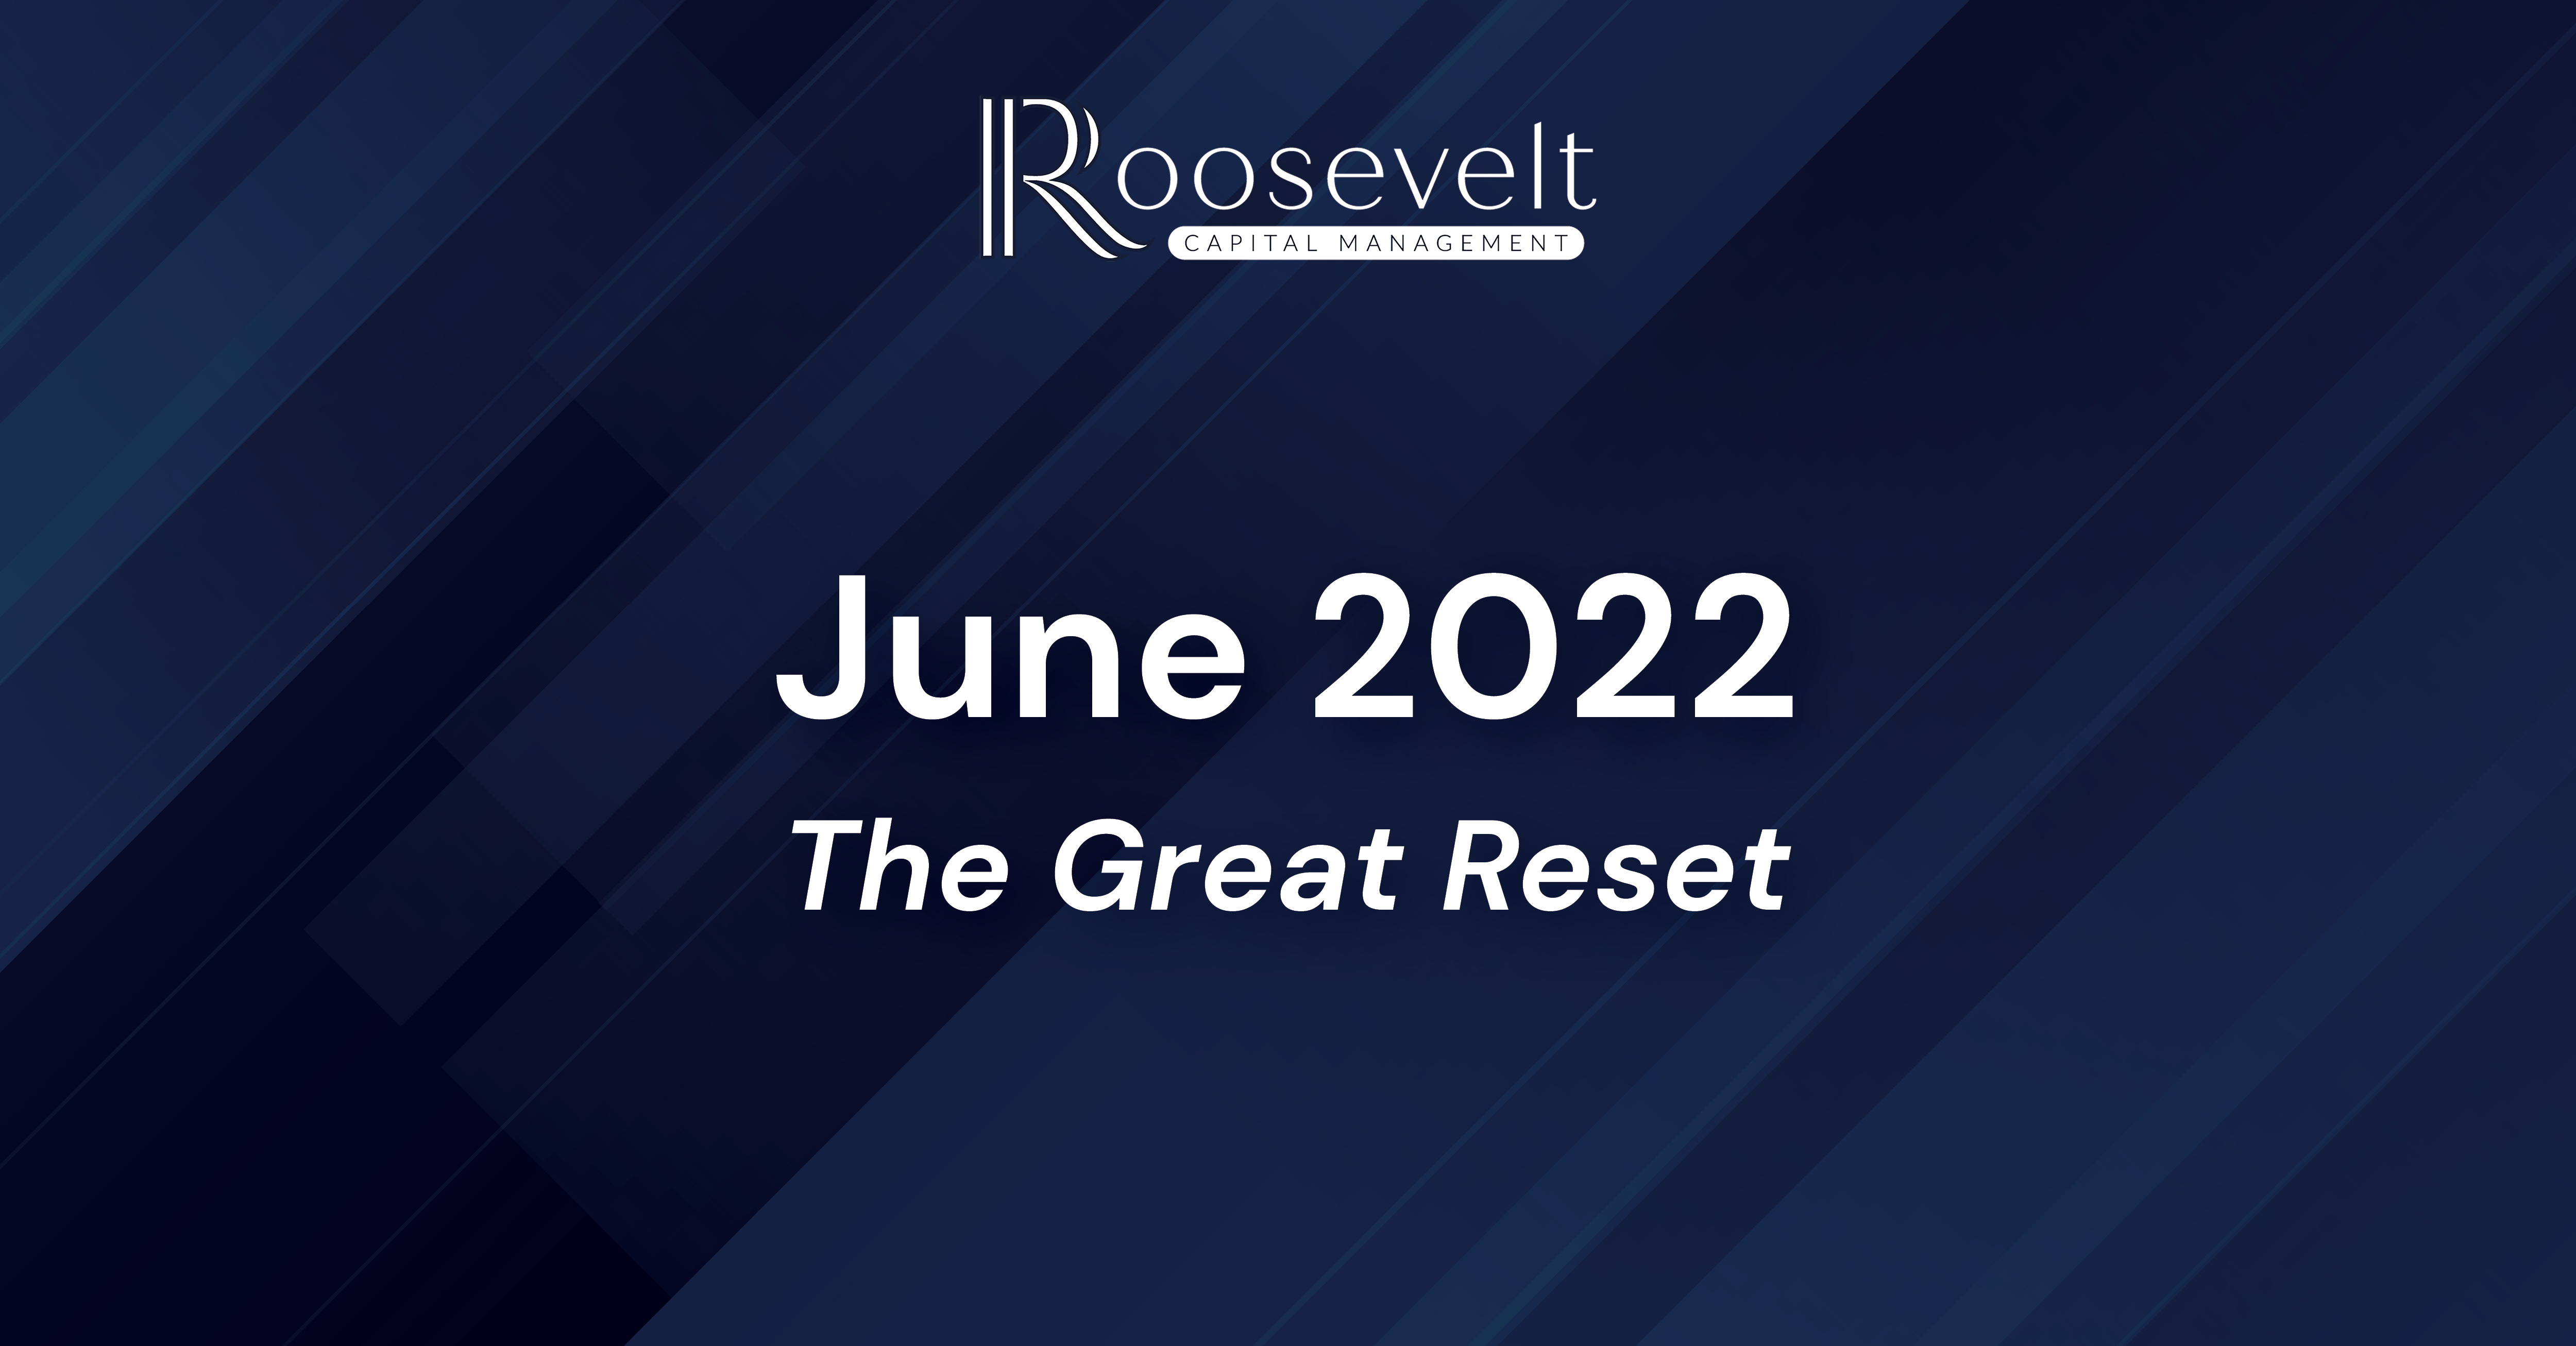 June 2022 - The Great Reset